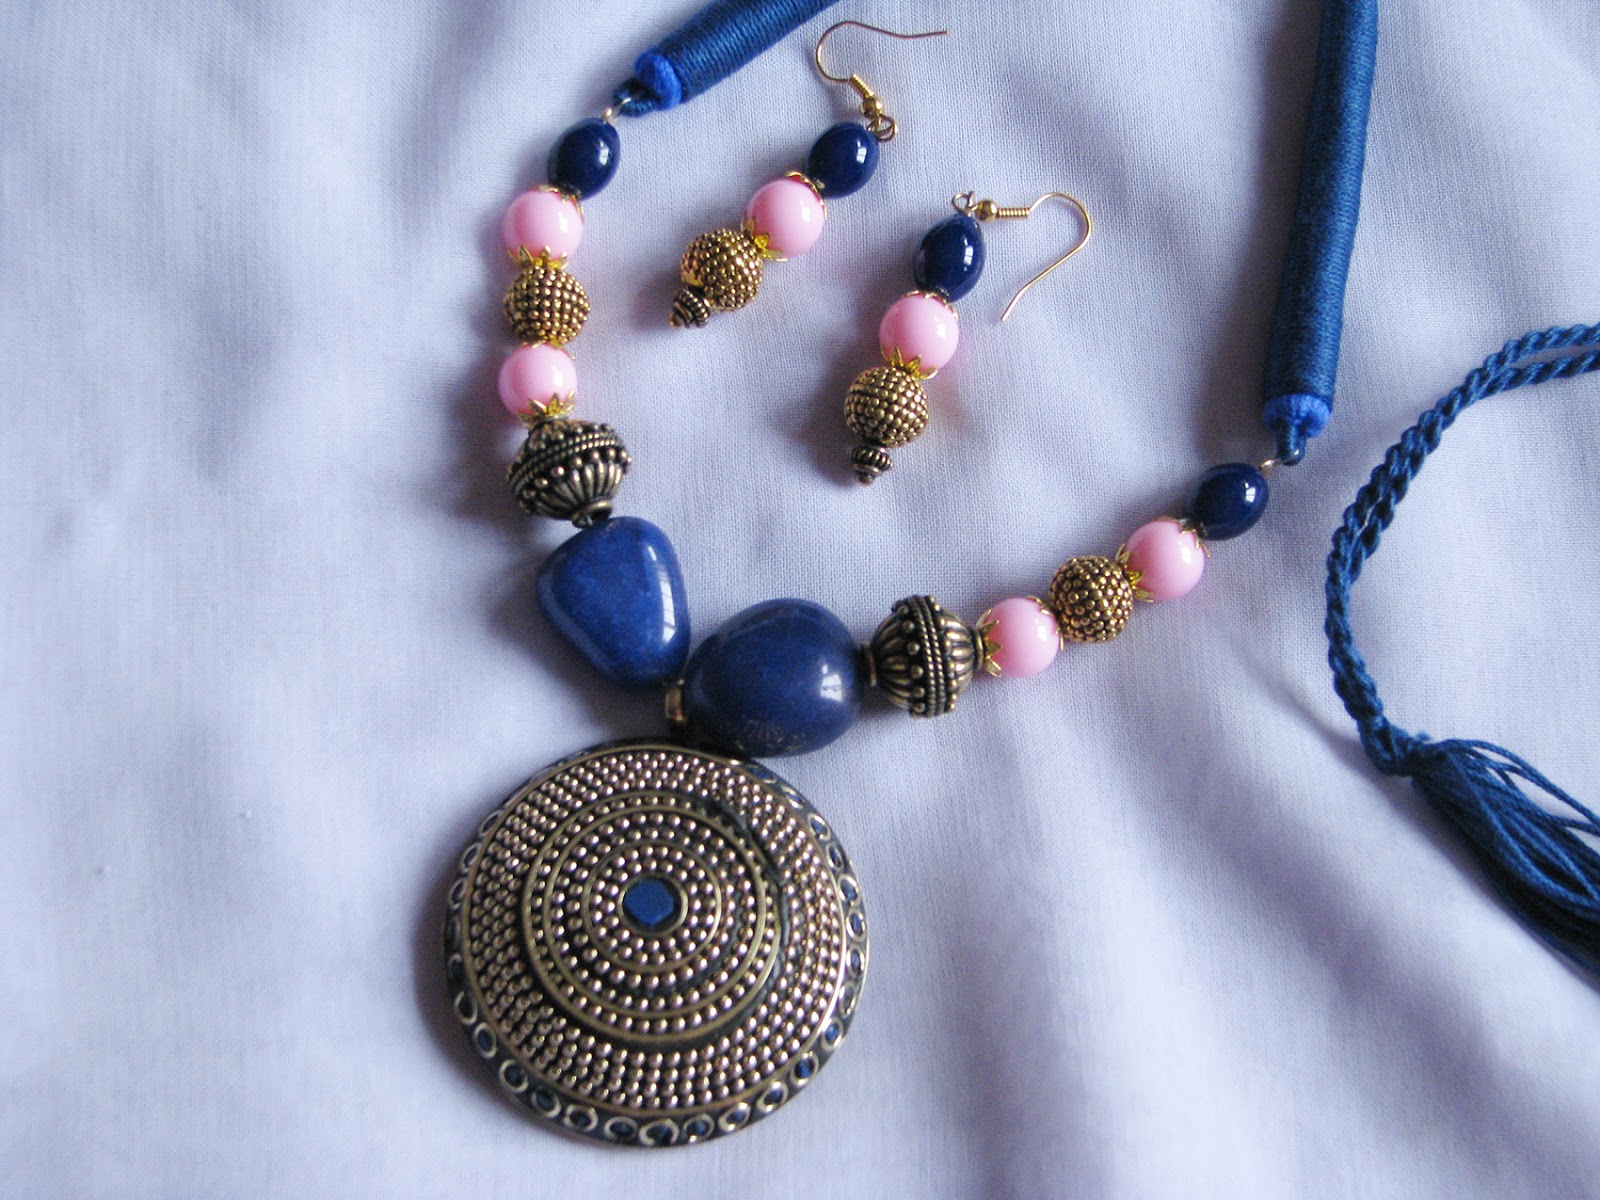 Can You Earn 1 Million Dollars in a Week? Bohemian handmade necklace and earrings